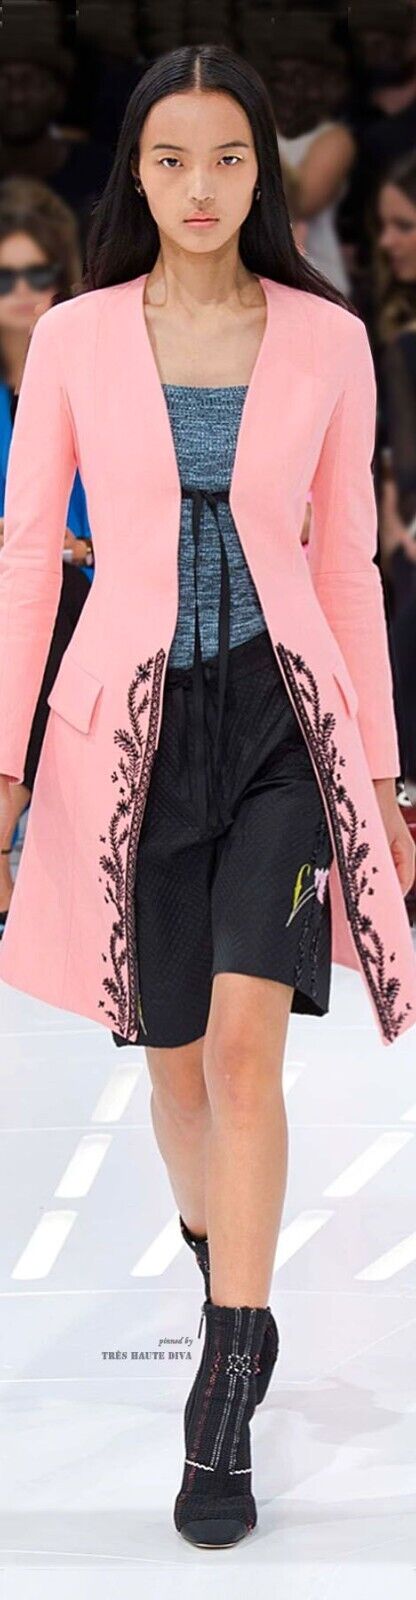 SS 2015 Runway Pale Pink Shapely Silk Blend Coat  Black Embroide